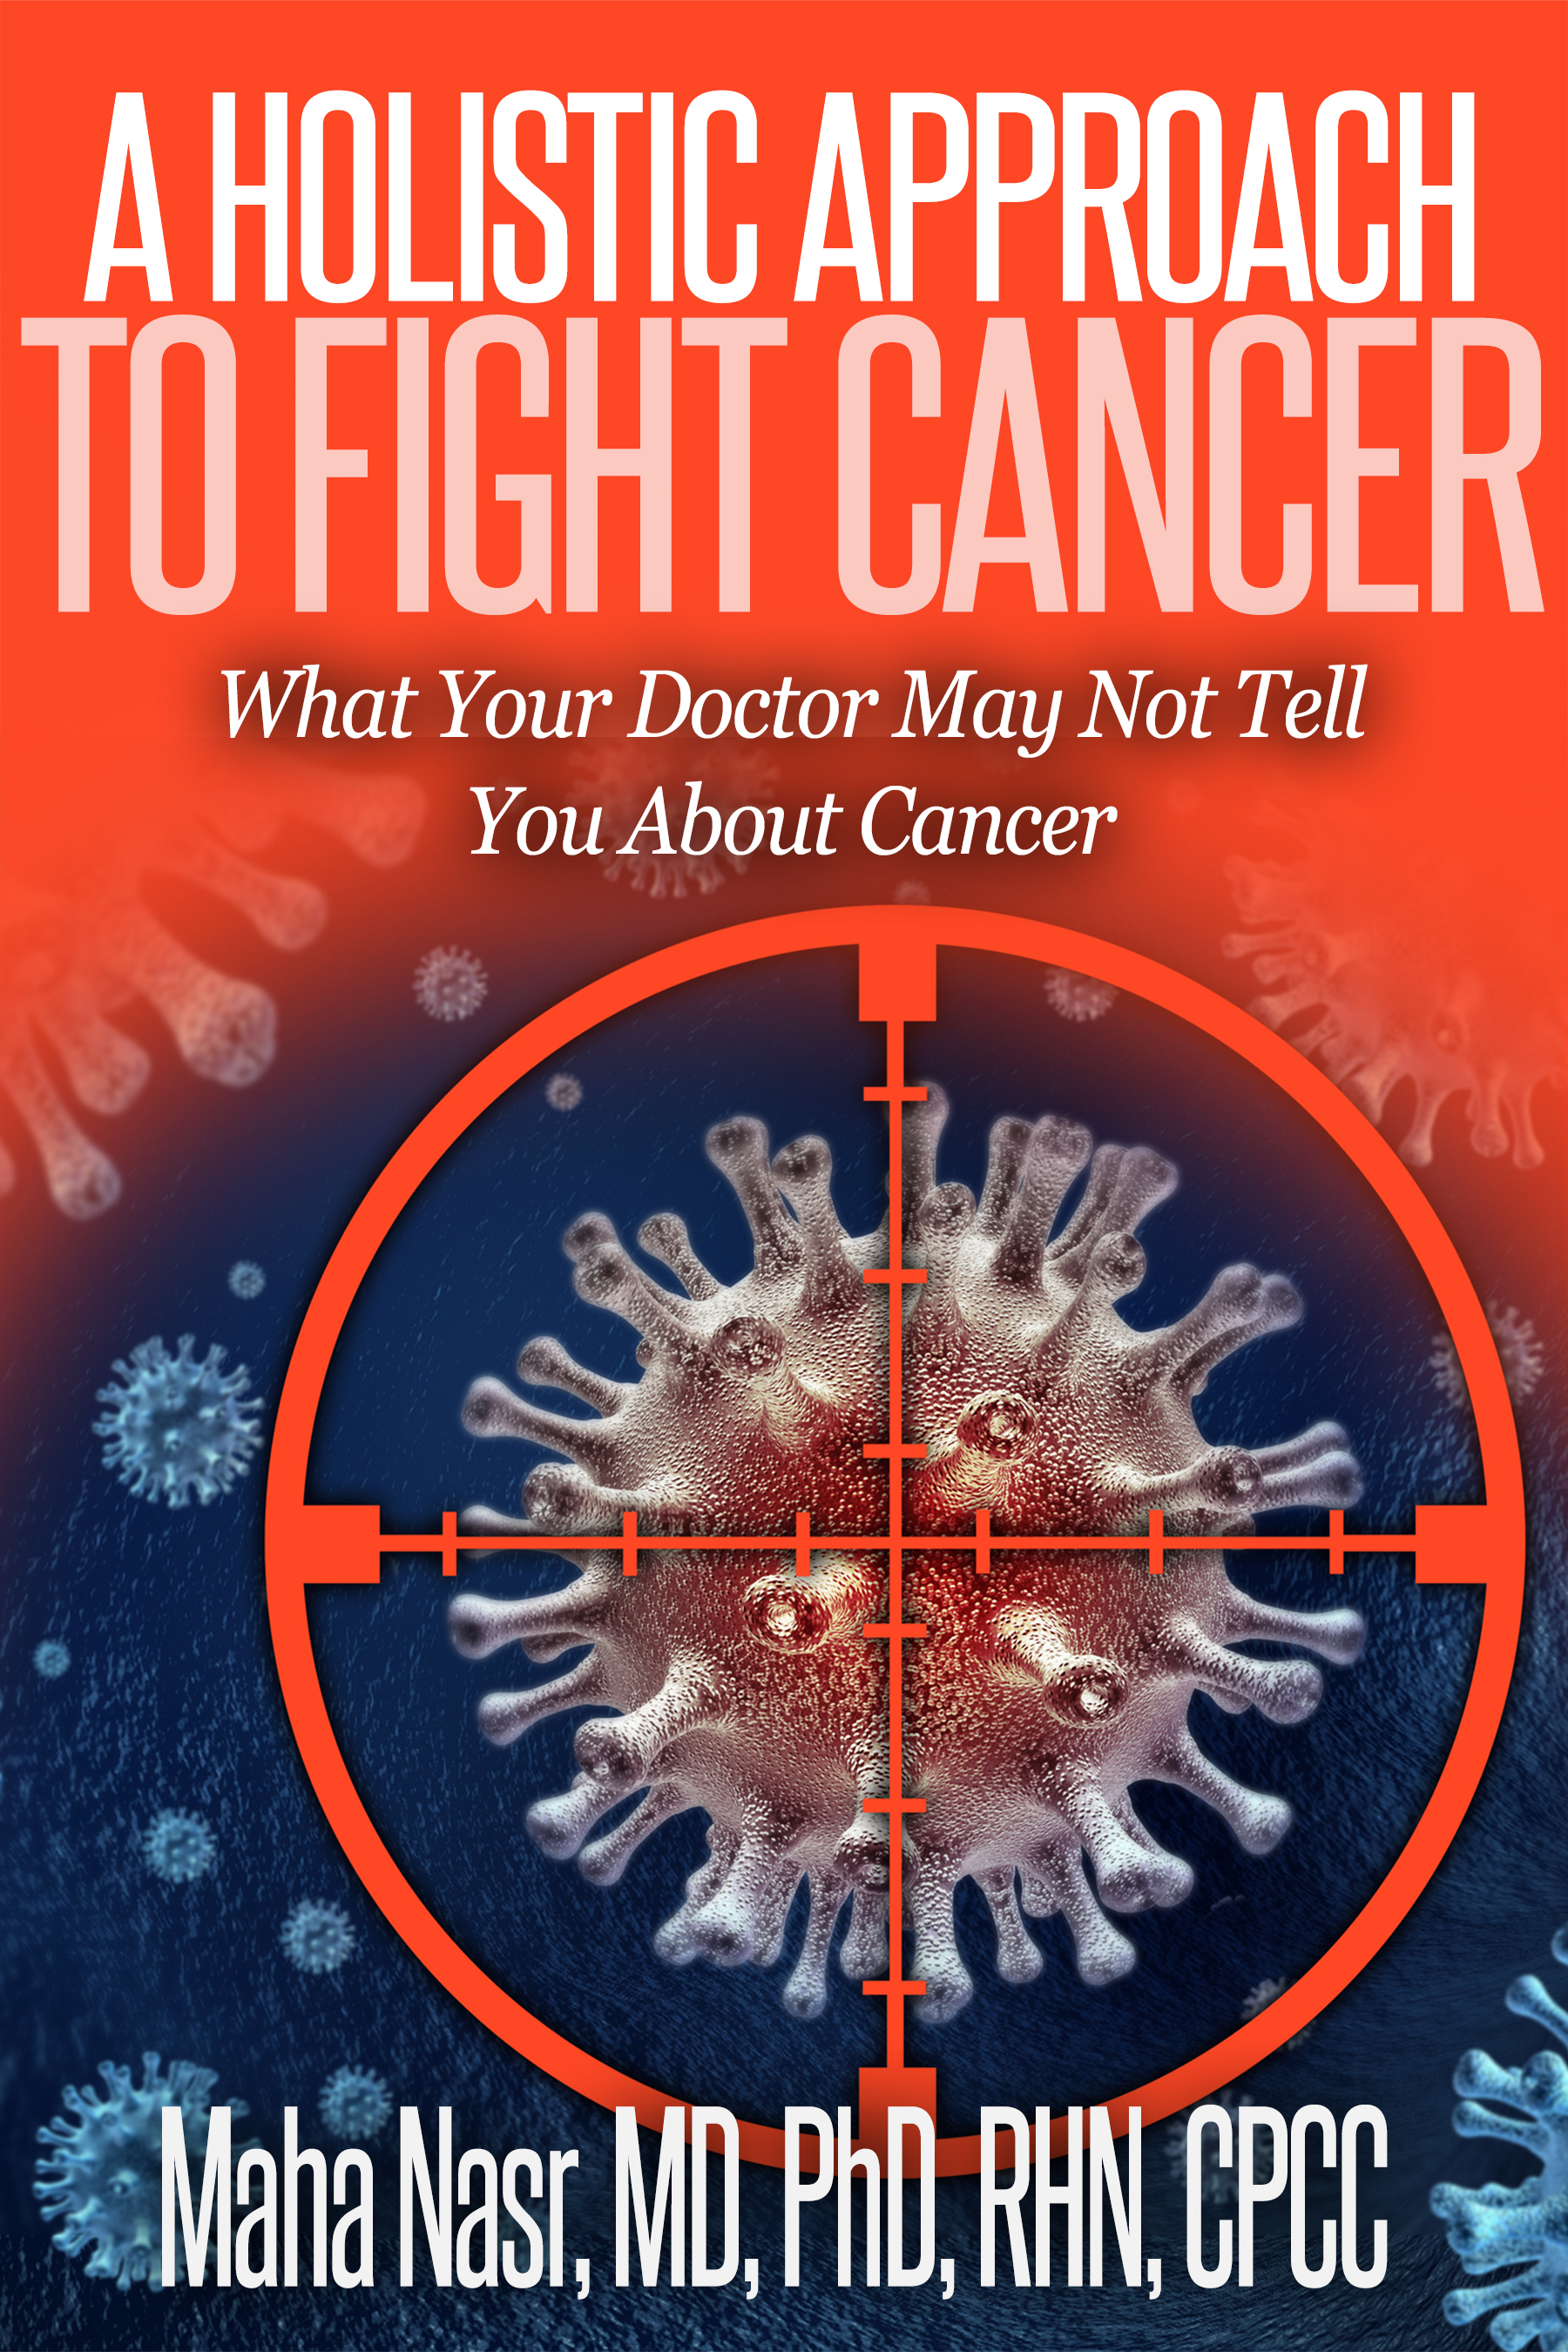 What your doctor may not tell you abut cancer